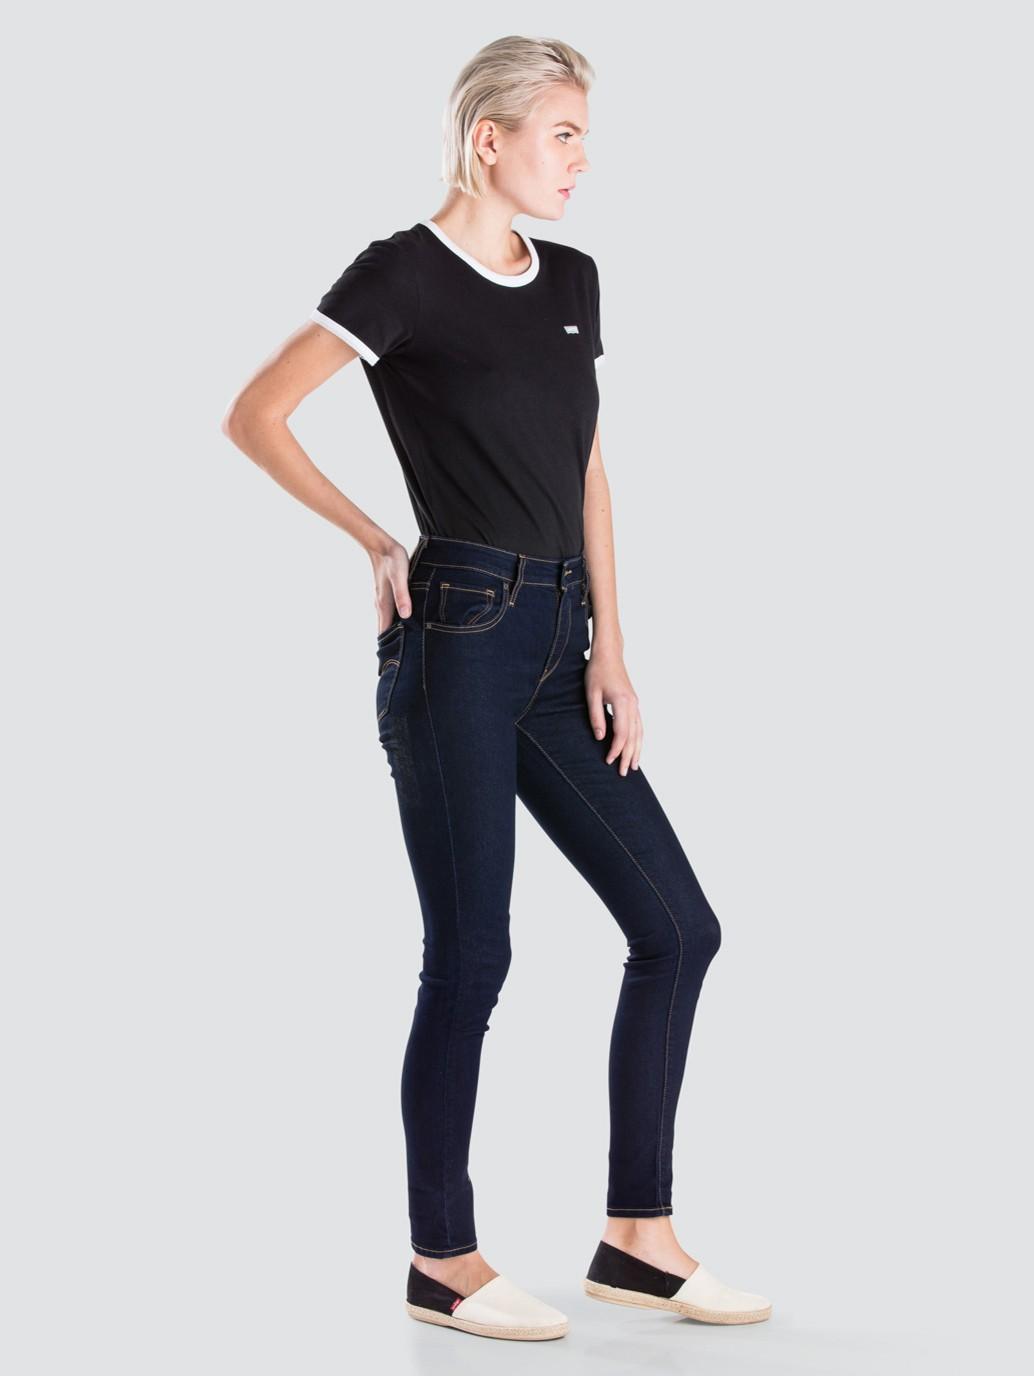 levis singapore Levis 721 High Rise Skinny Jeans 188820023 03 Side